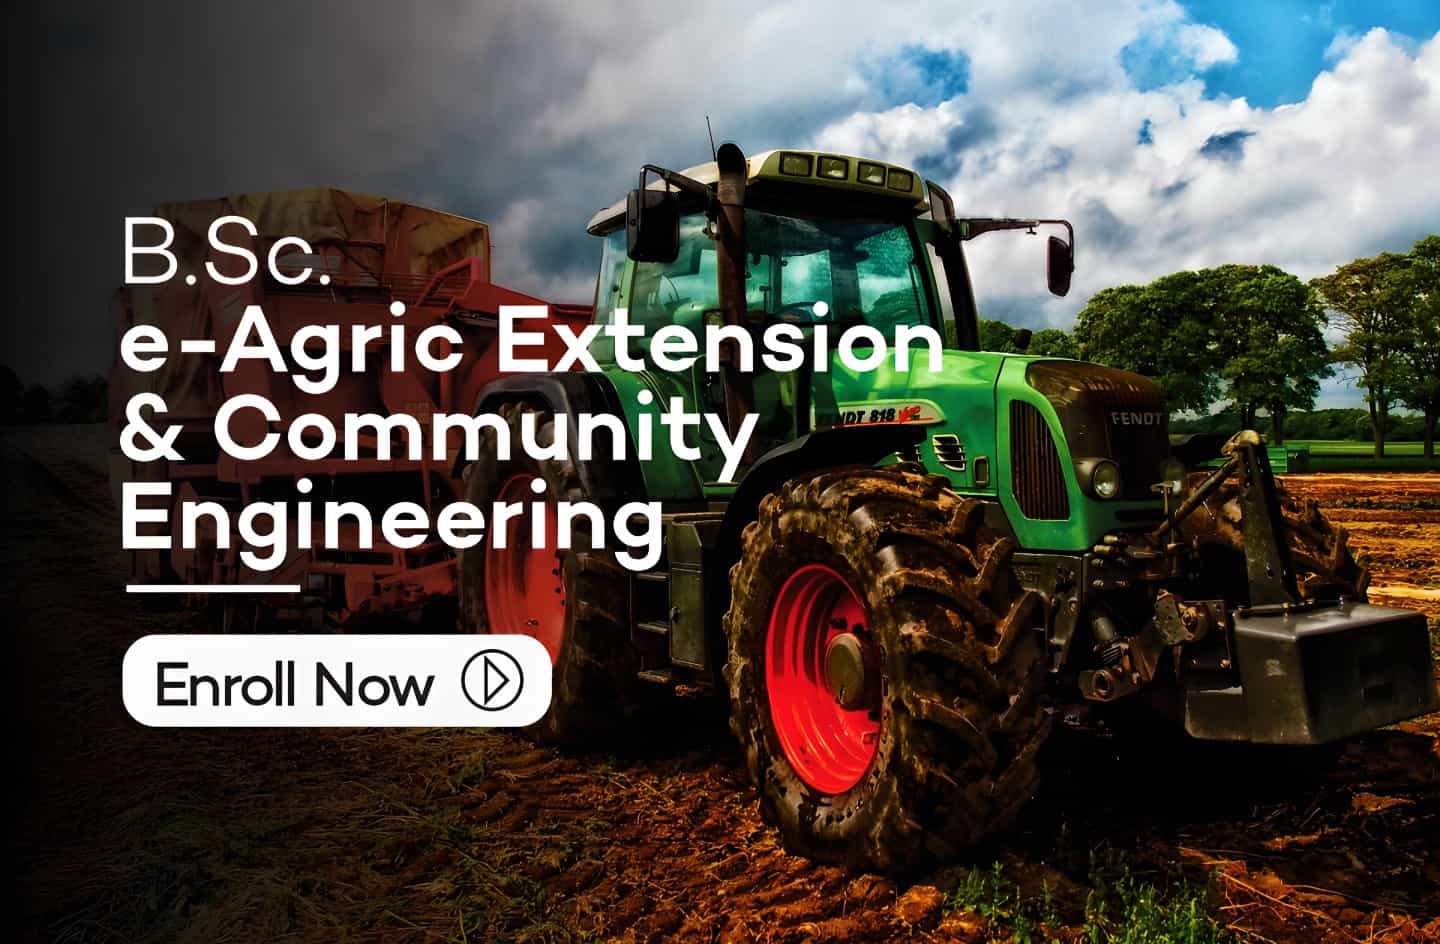 OAU B.Sc. Programme in e-Agricultural Extension and Community Engineering